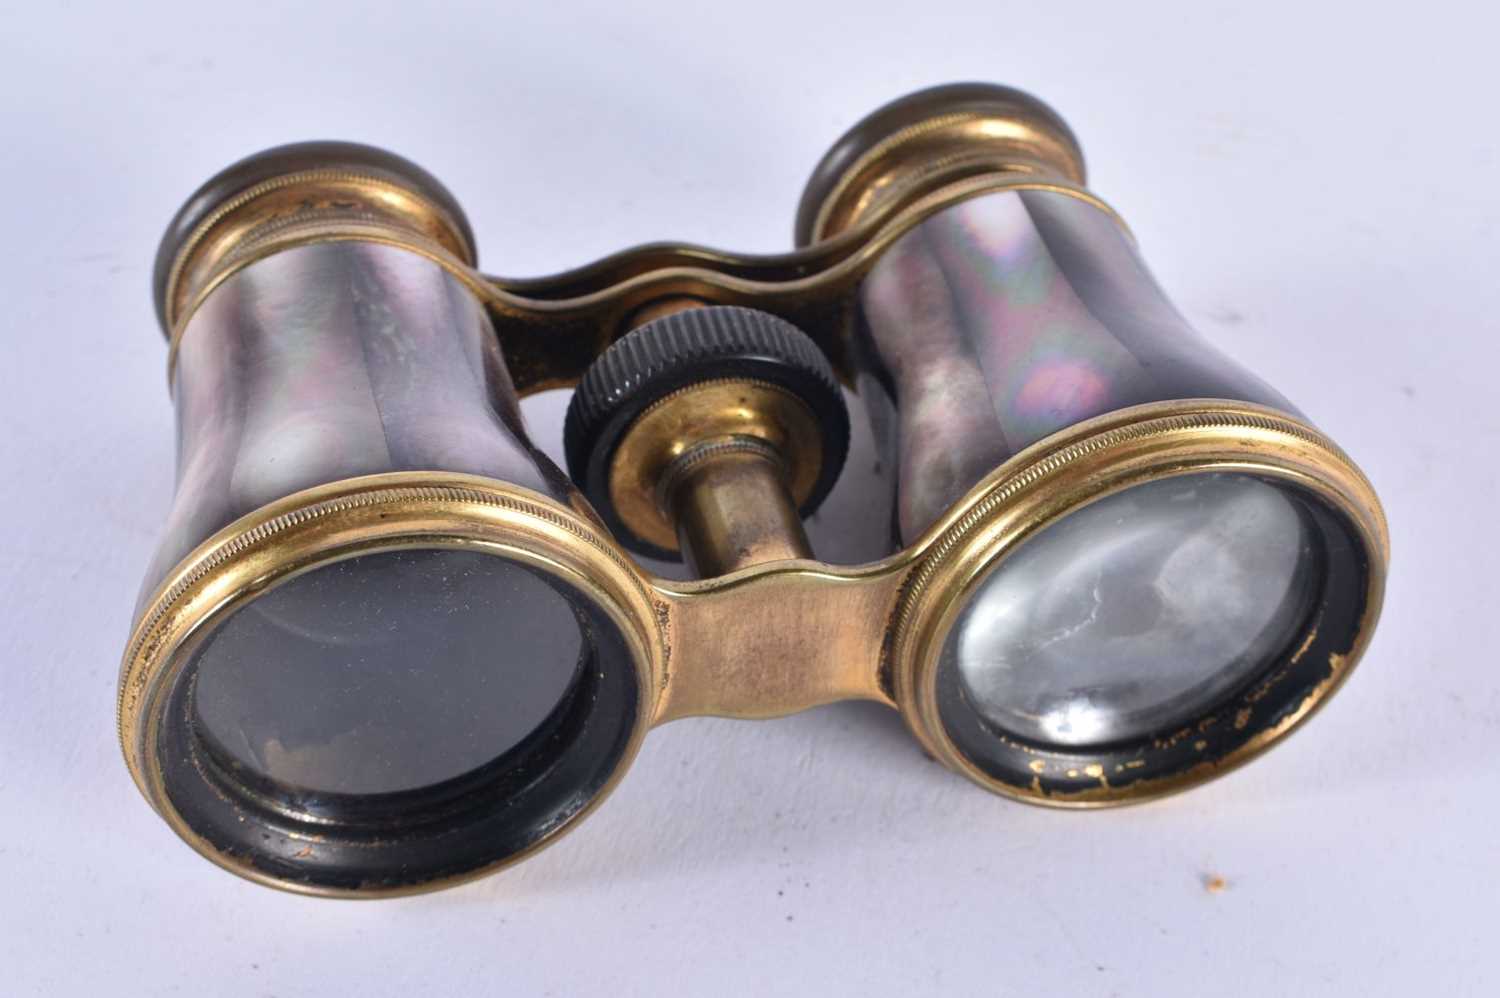 A PAIR OF MOTHER OF PEARL OPERA GLASSES. 9 cm x 8 cm extended.